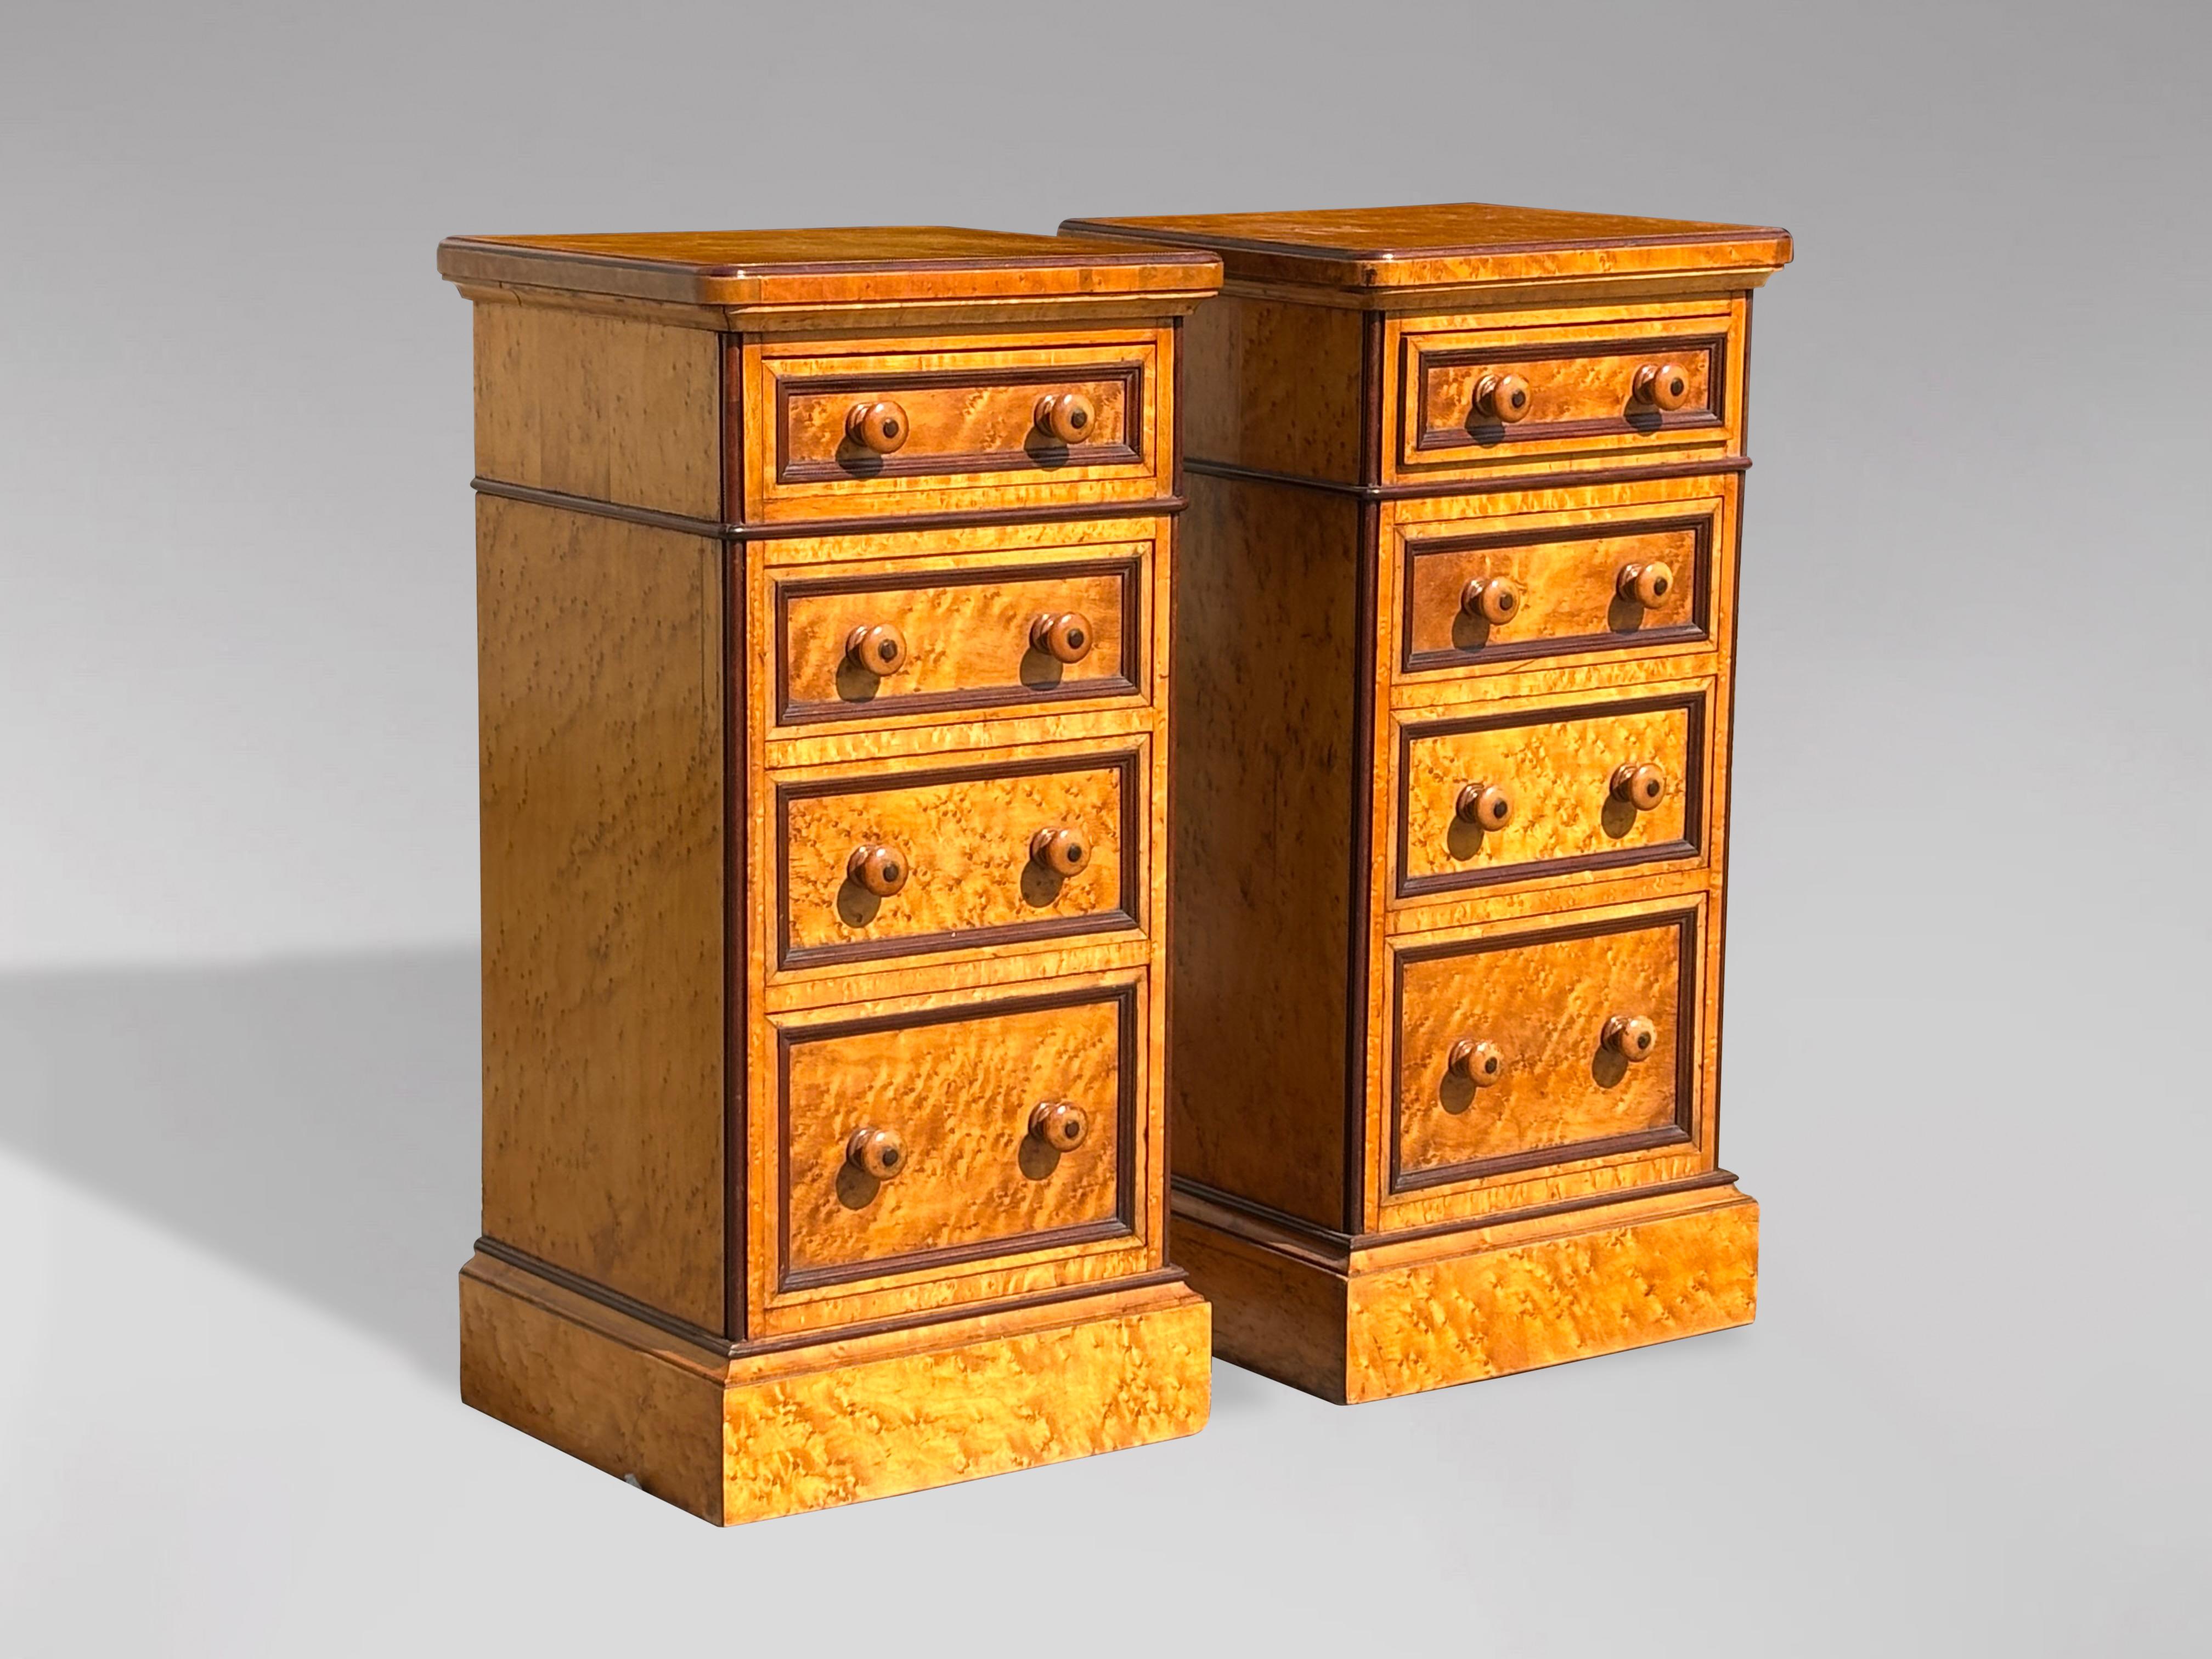 A superb quality pair of mid Victorian chest of drawers or bedside cabinets in birdseye maple and mahogany. The rectangular rounded corners tops in nicely figured light birdseye maple with canted edges above four graduated mahogany lined drawers